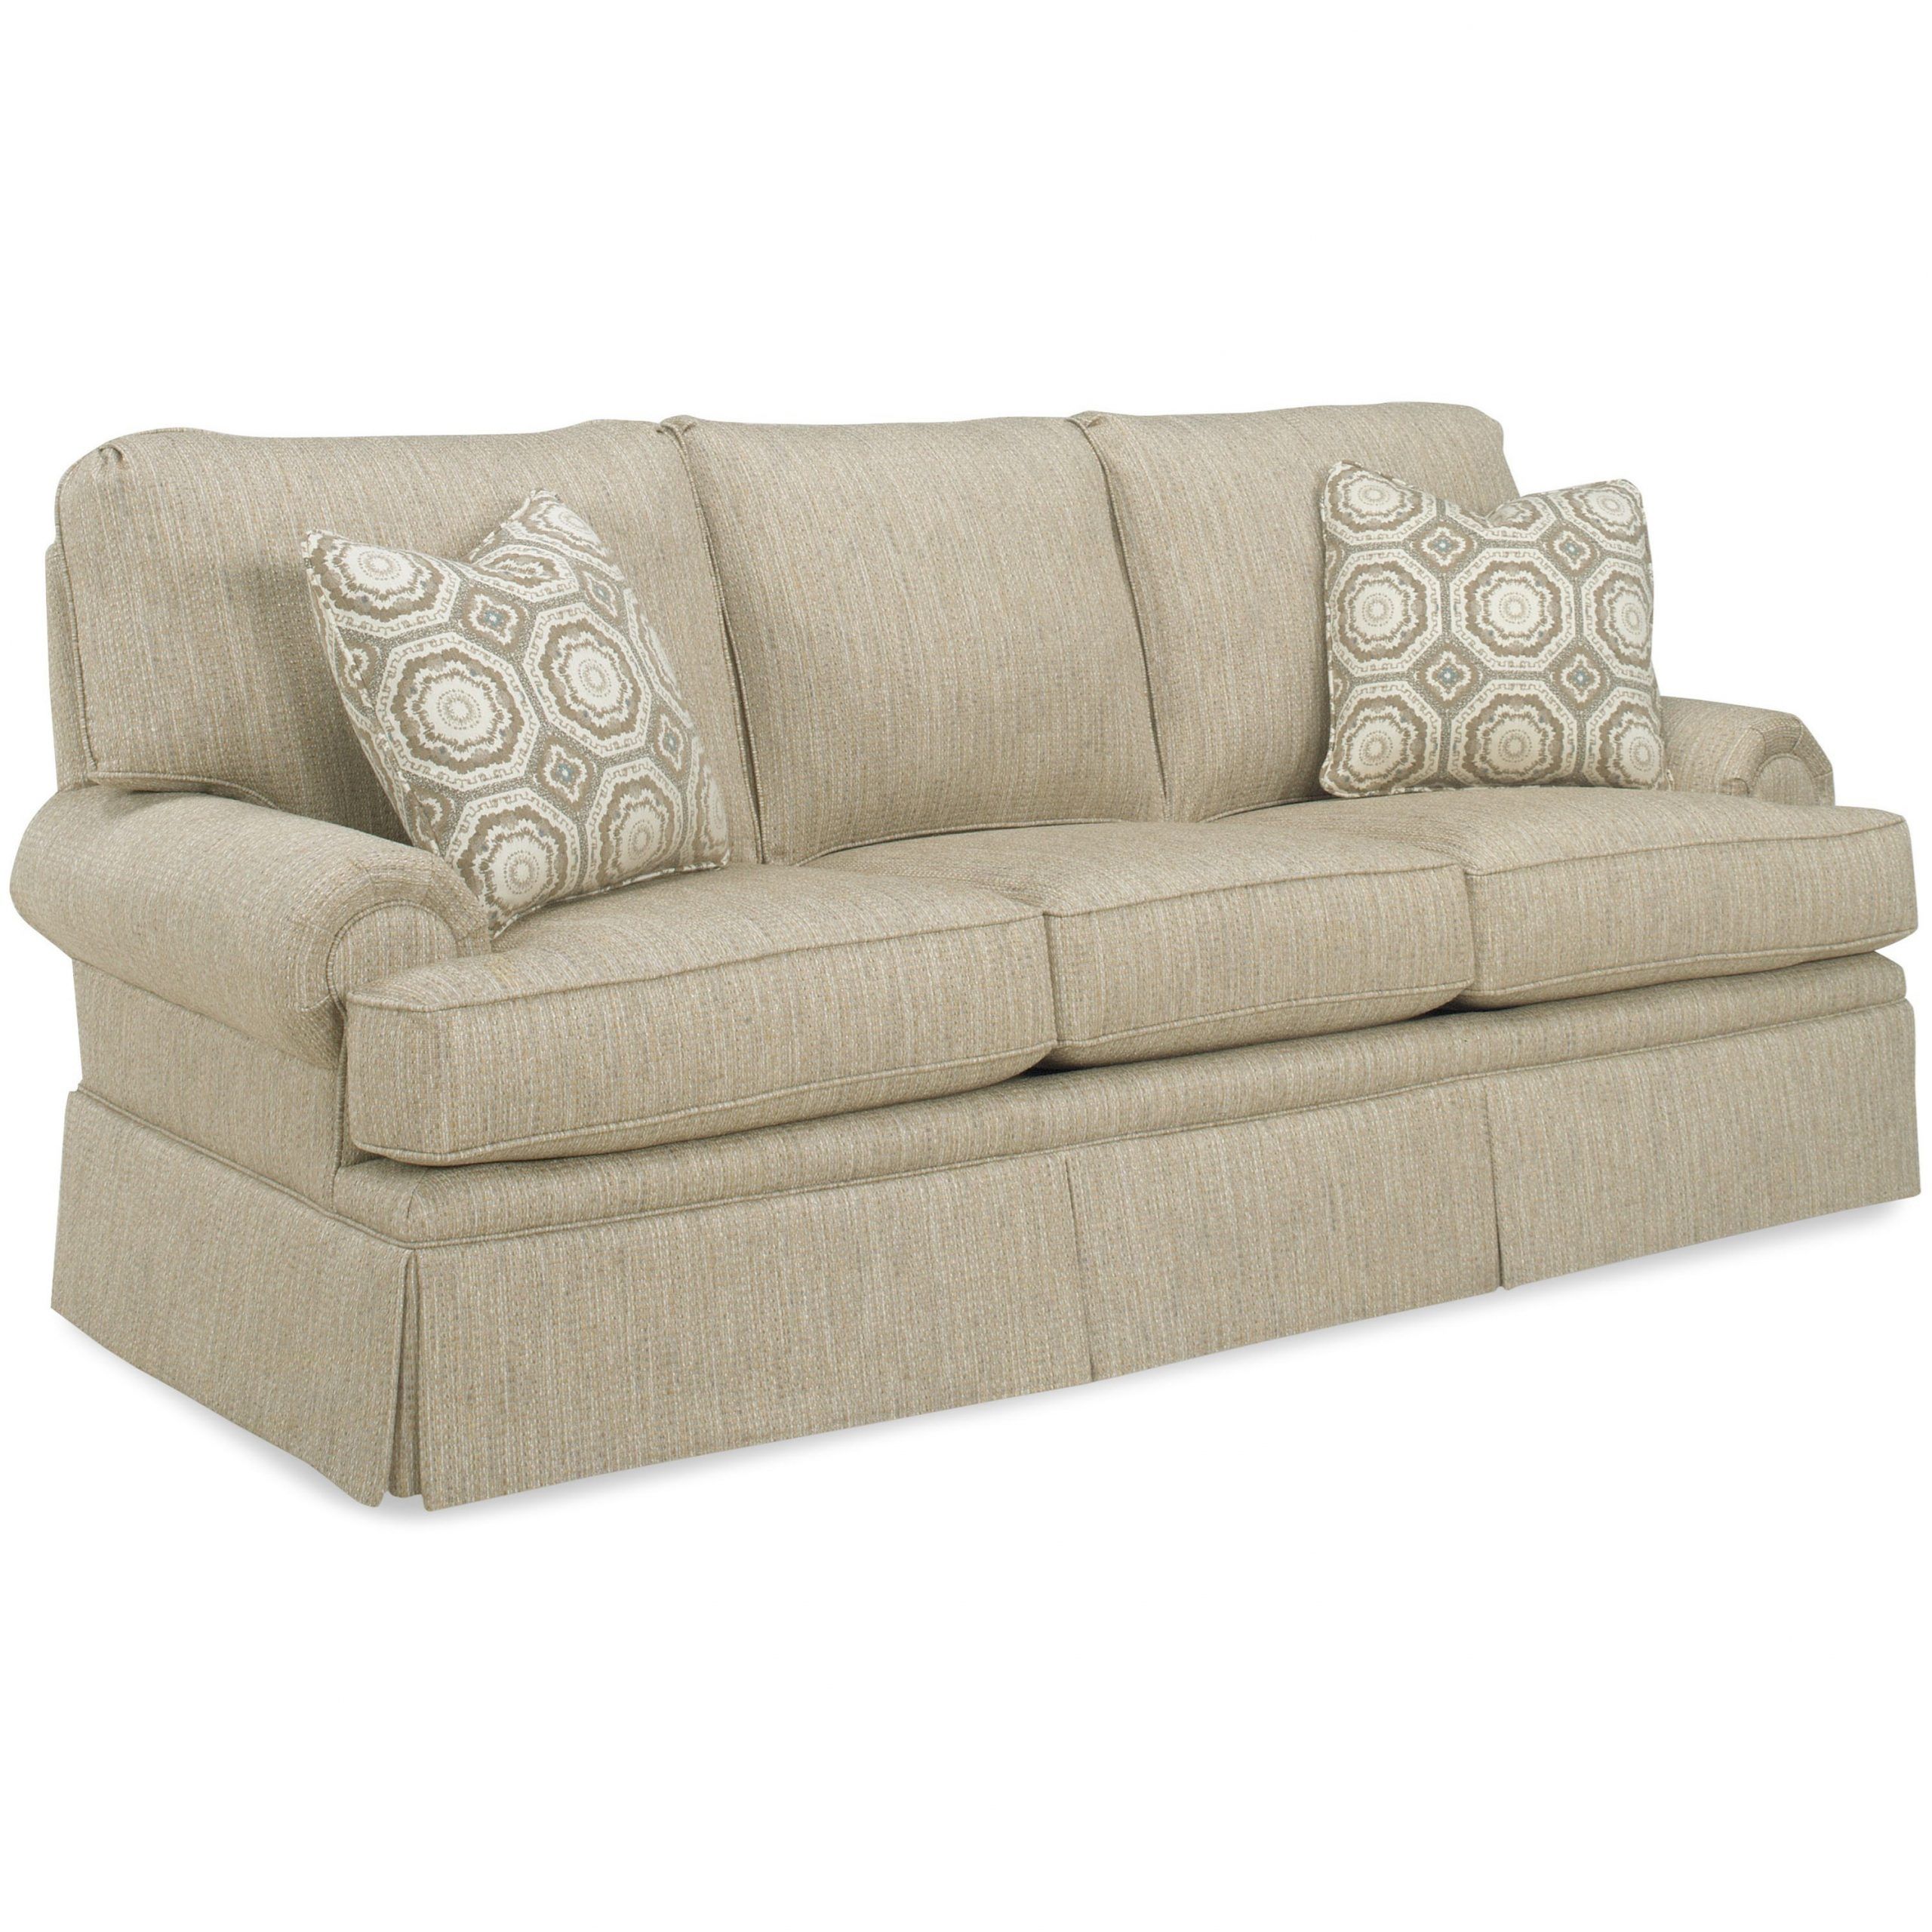 Temple Furniture Winston Sofa With Skirt | Mueller Pertaining To Winston Sofa Sectional Sofas (View 5 of 15)